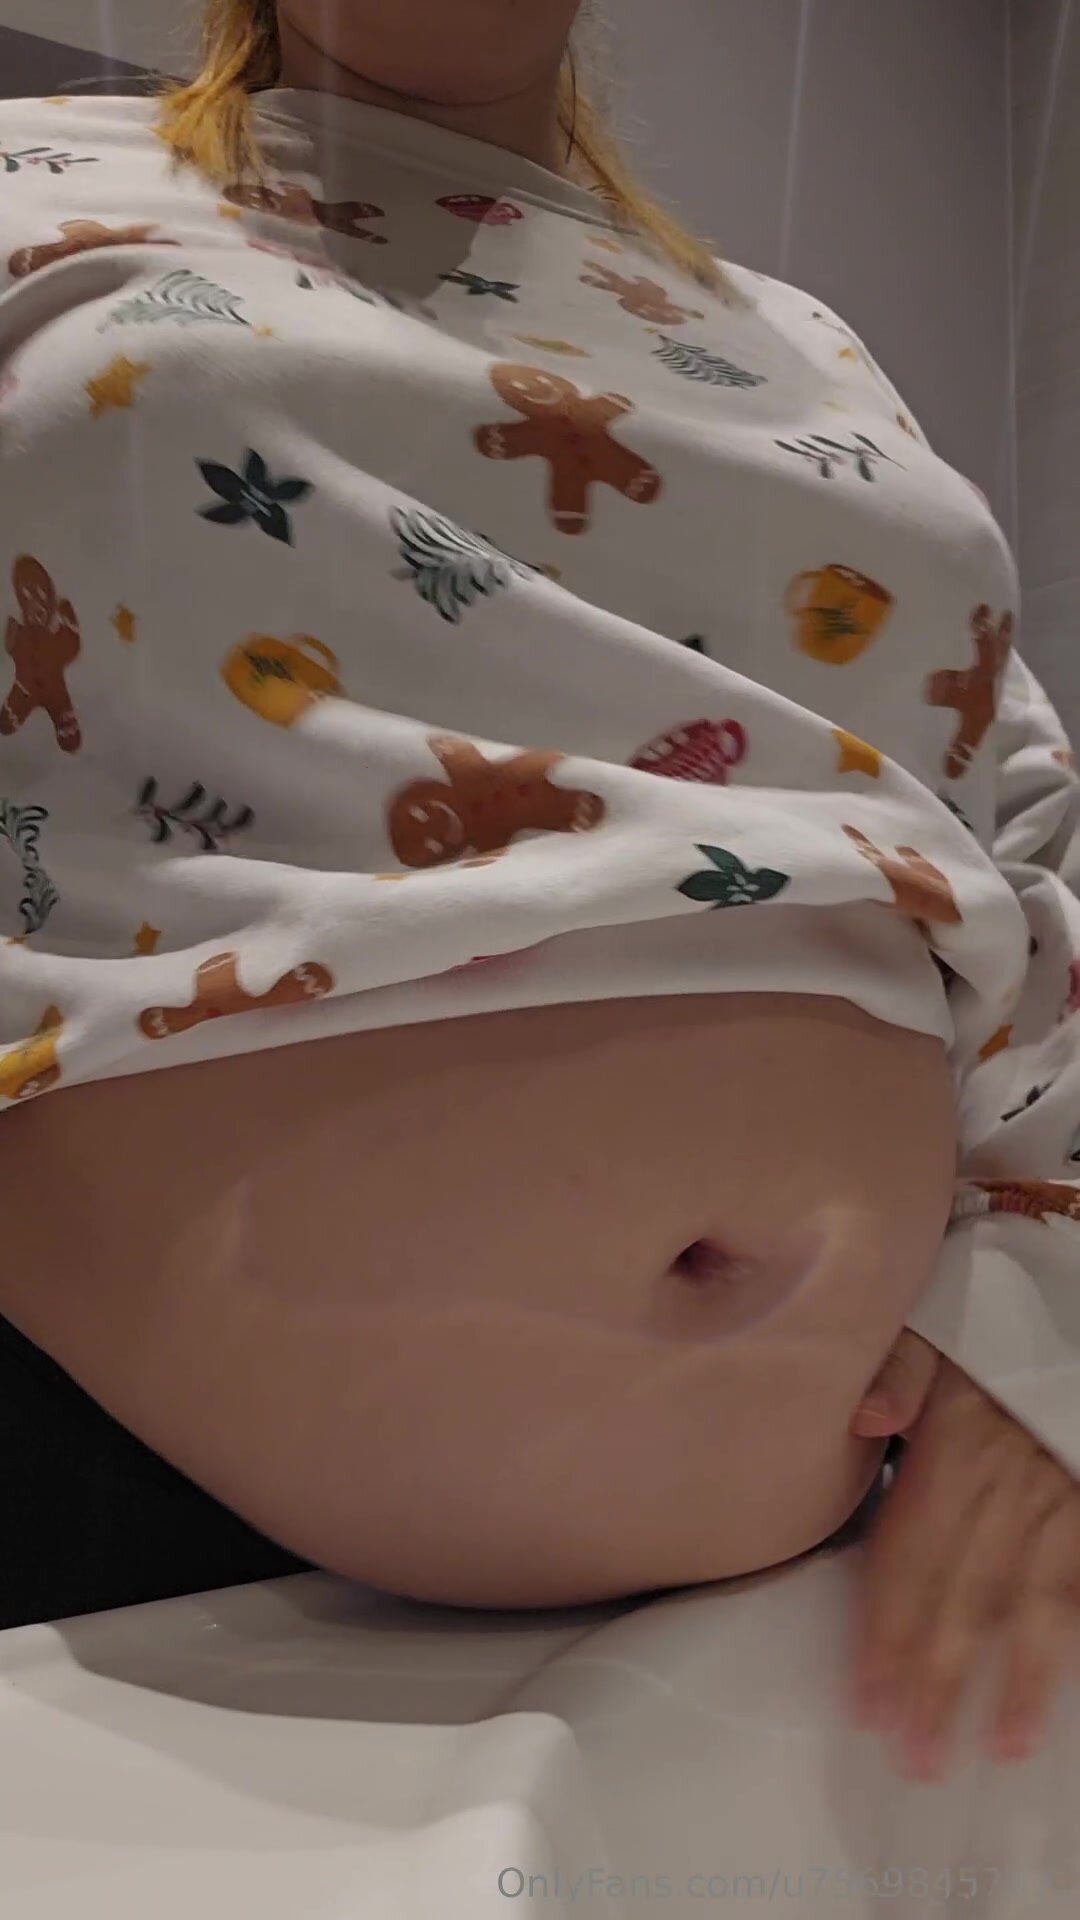 belly play - video 61